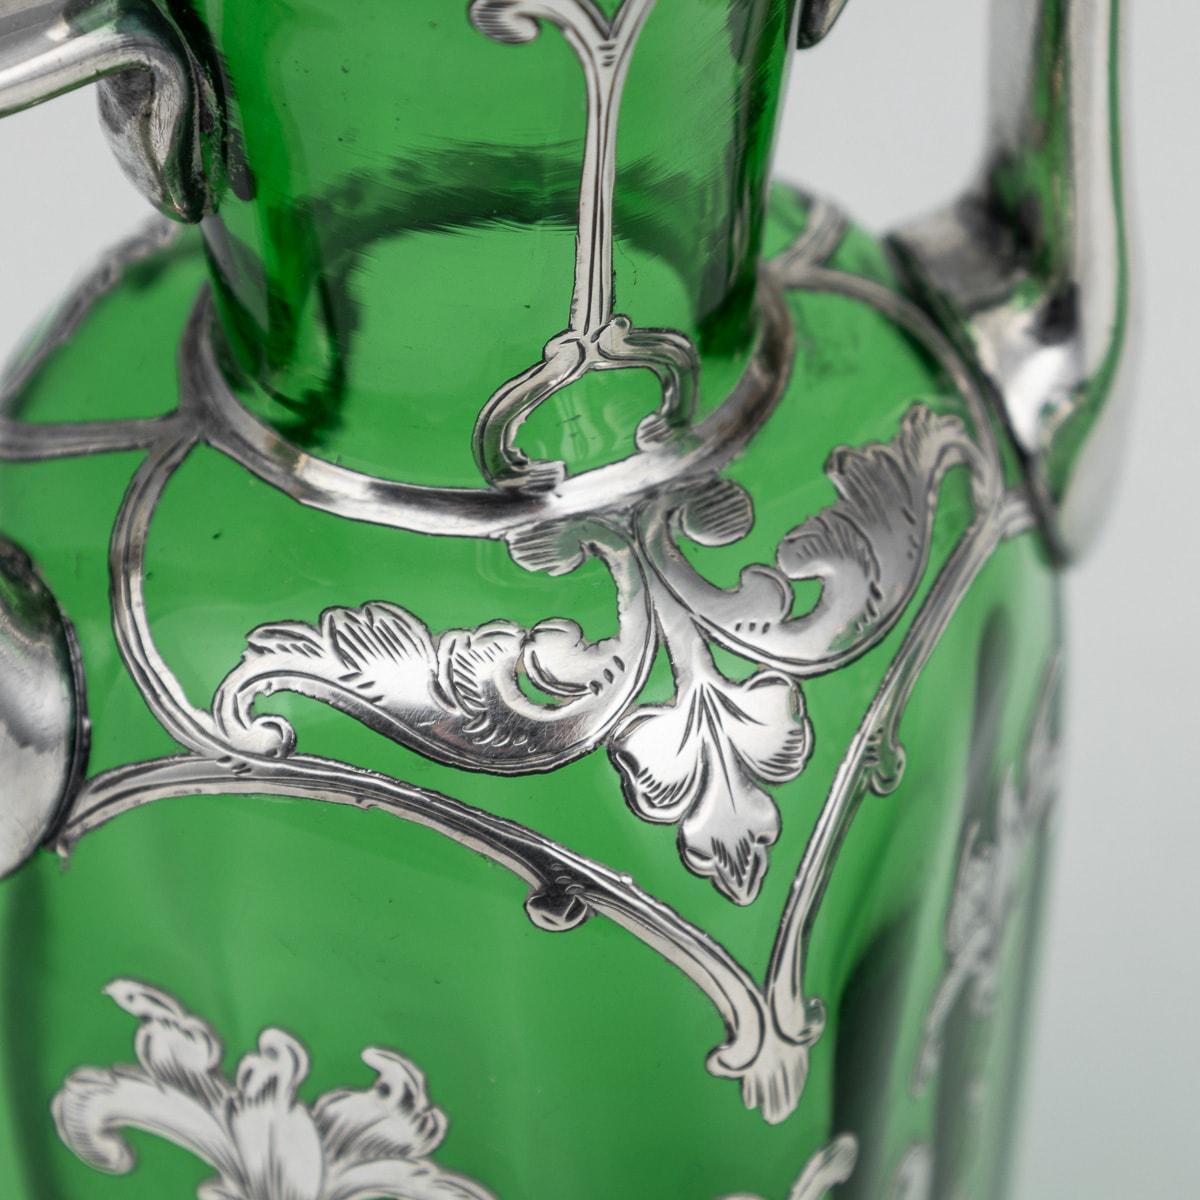 20th Century American Pair Of Green Glass Vases With Silver Overlay c.1920 For Sale 1